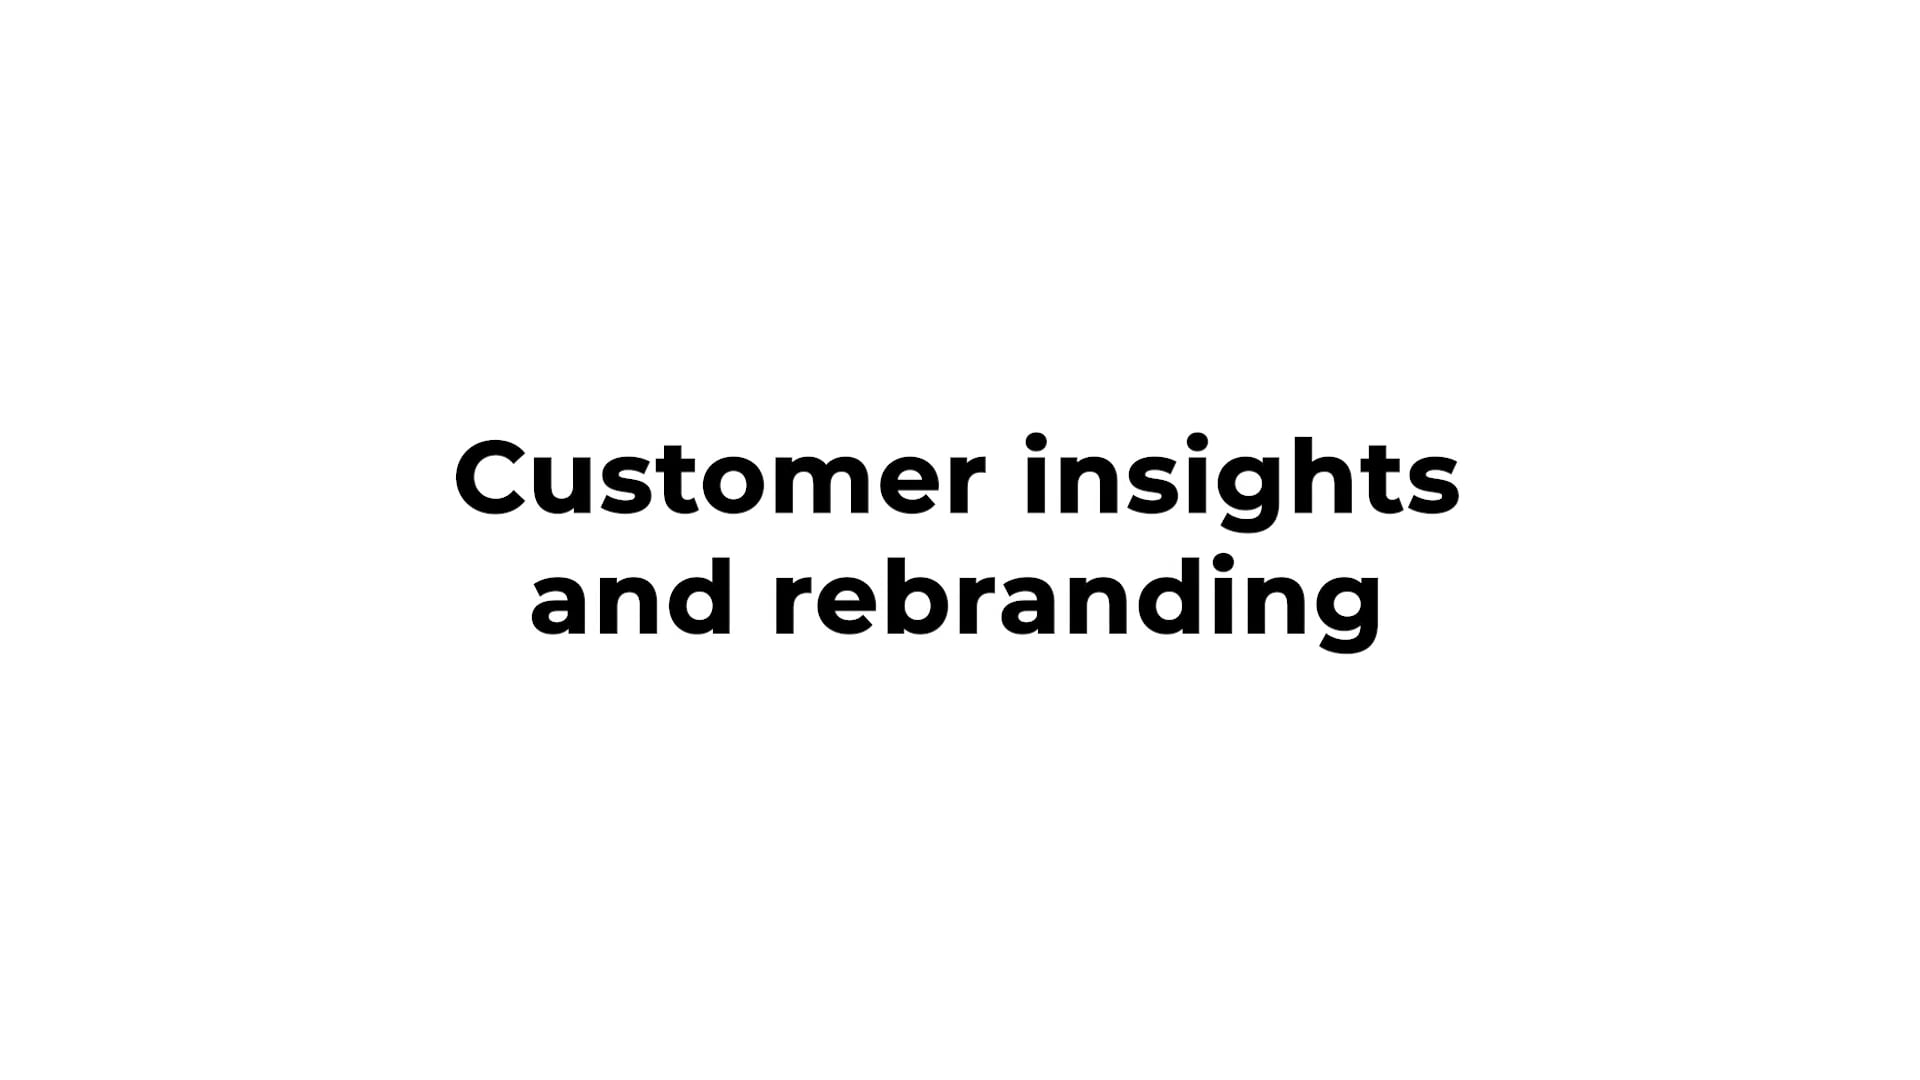 Customer/key stakeholder insights for a rebrand